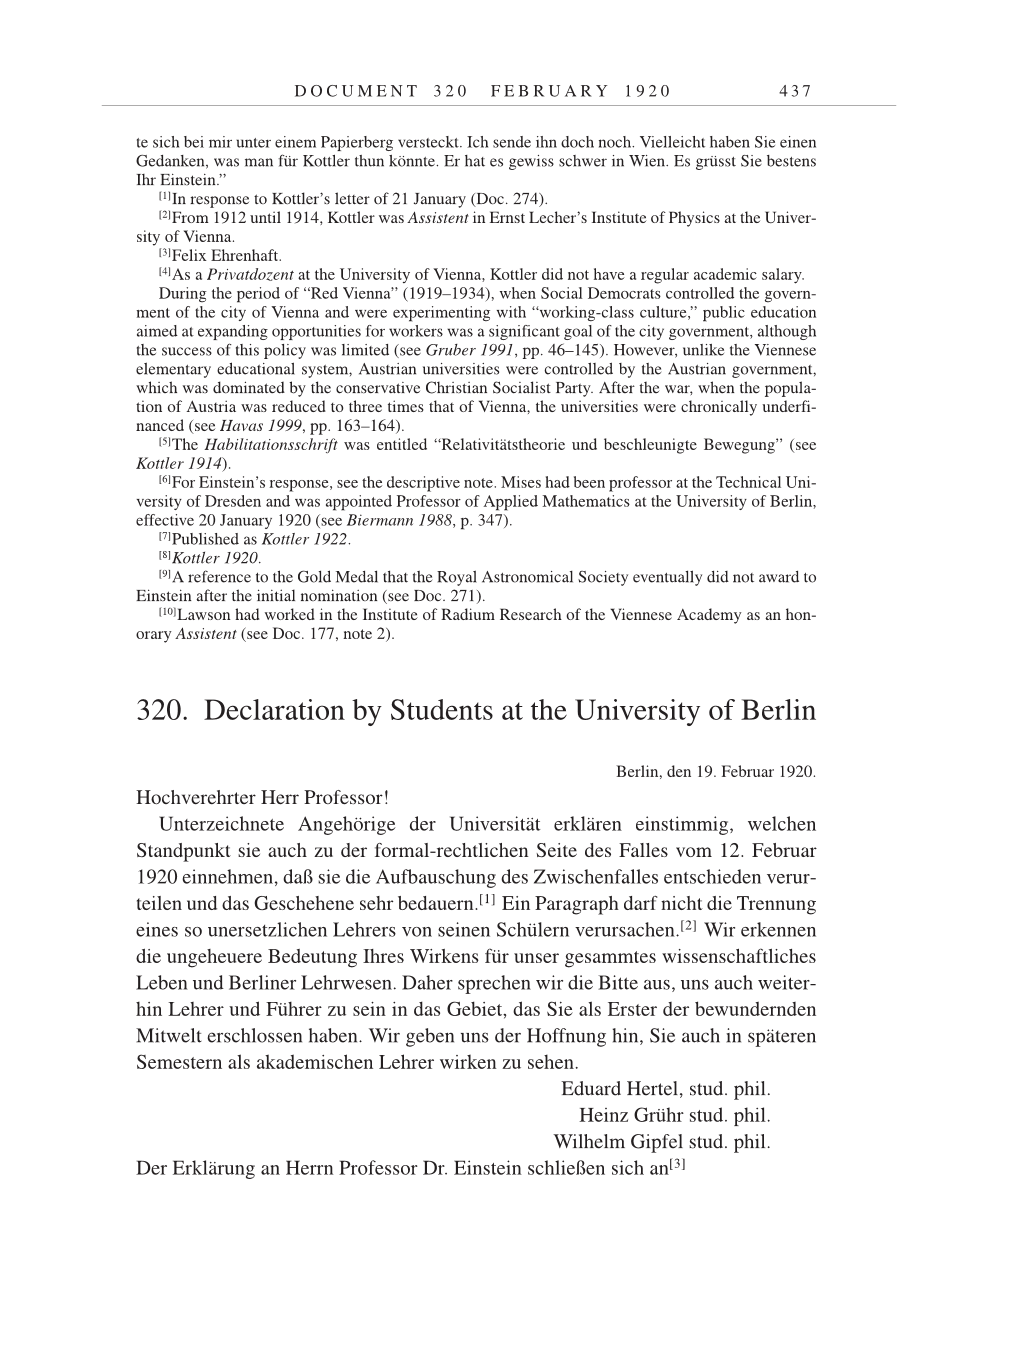 Volume 9: The Berlin Years: Correspondence January 1919-April 1920 page 437